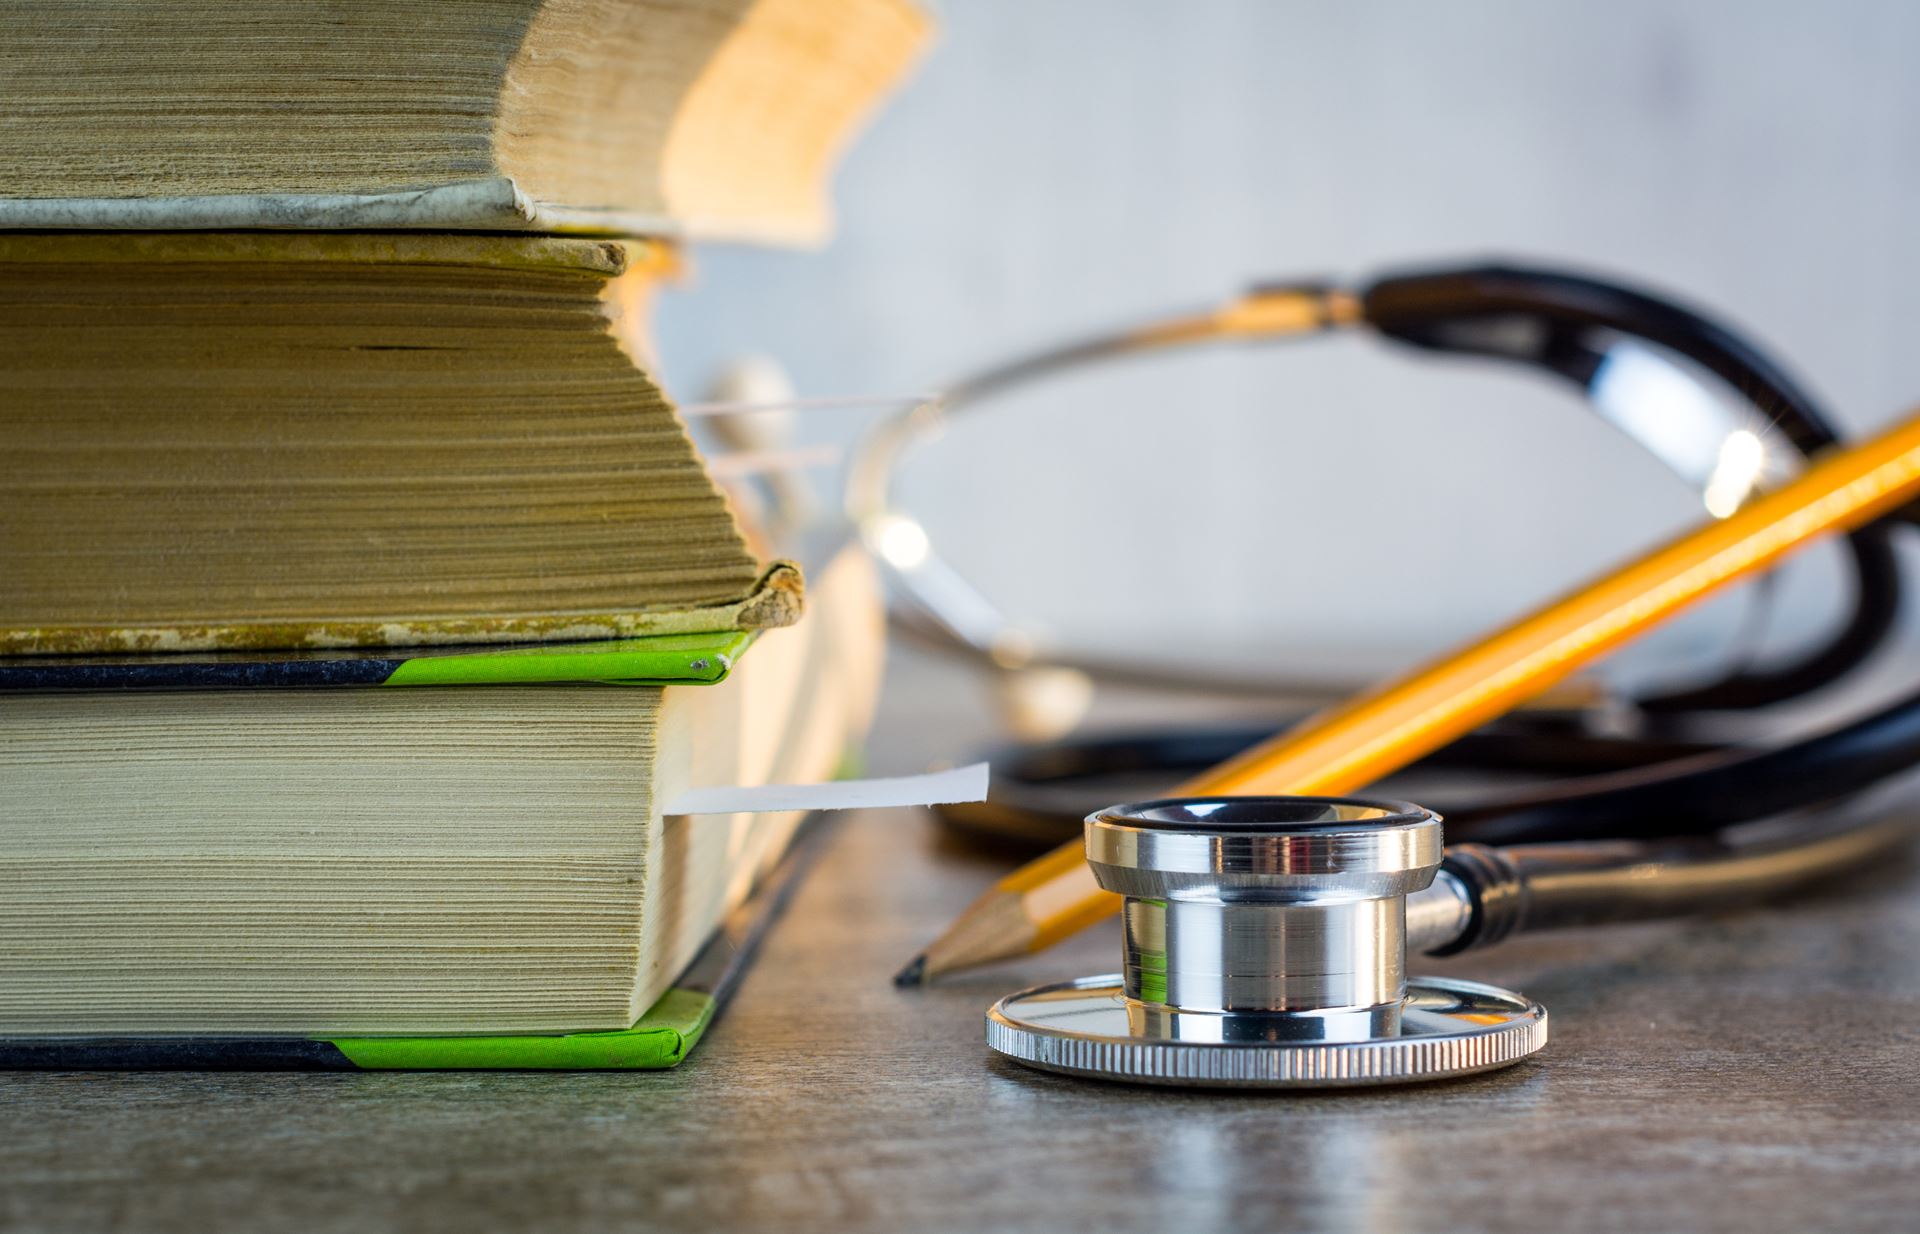 stethoscope next to a book